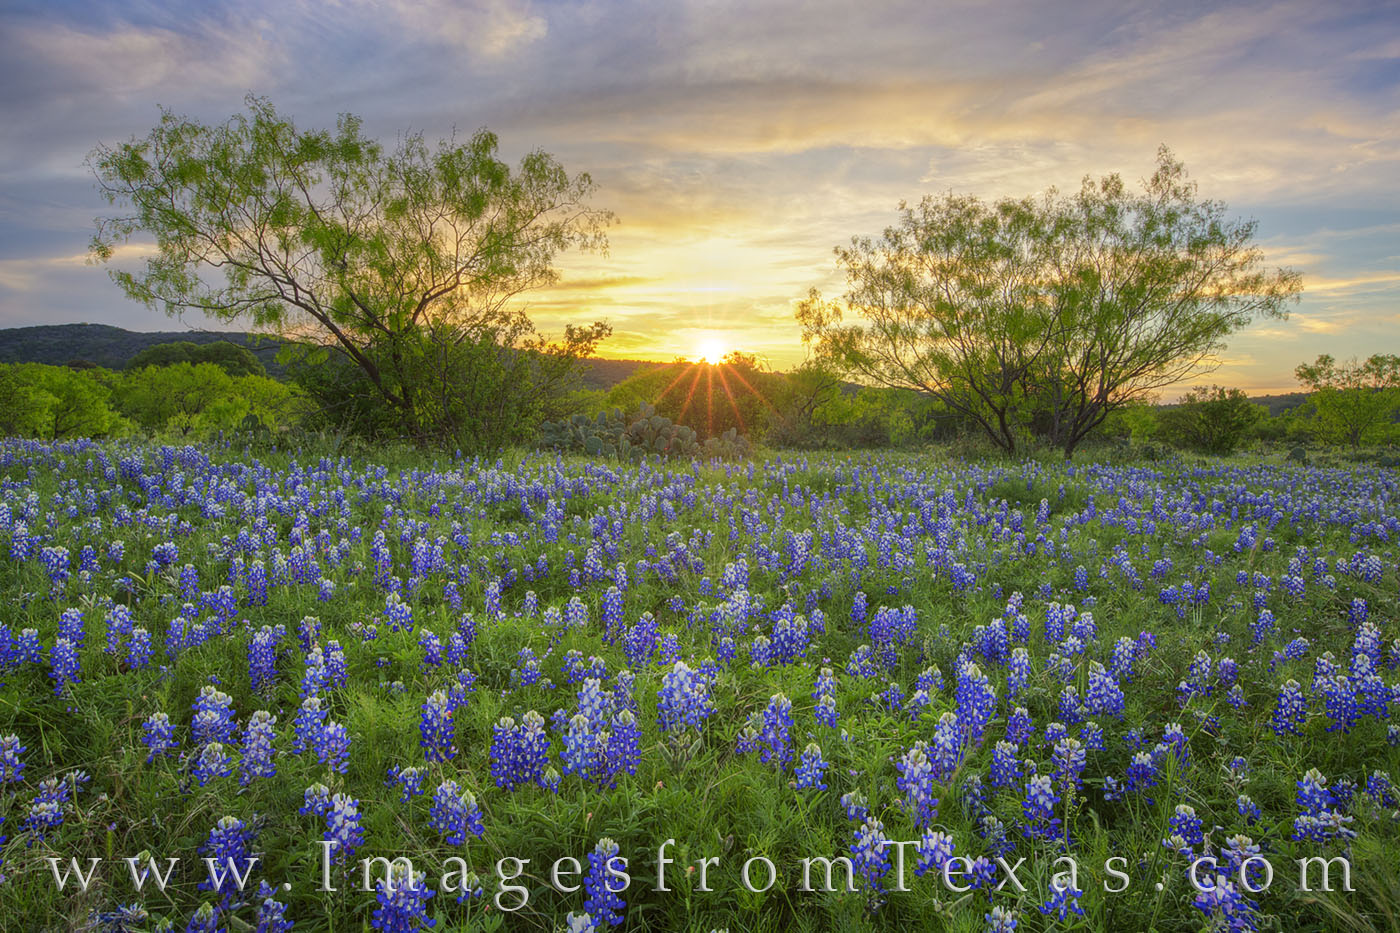 At the end of a full day of scouting and shooting bluebonnets in the Hill Country, I ended up at this small patch of Texas’...